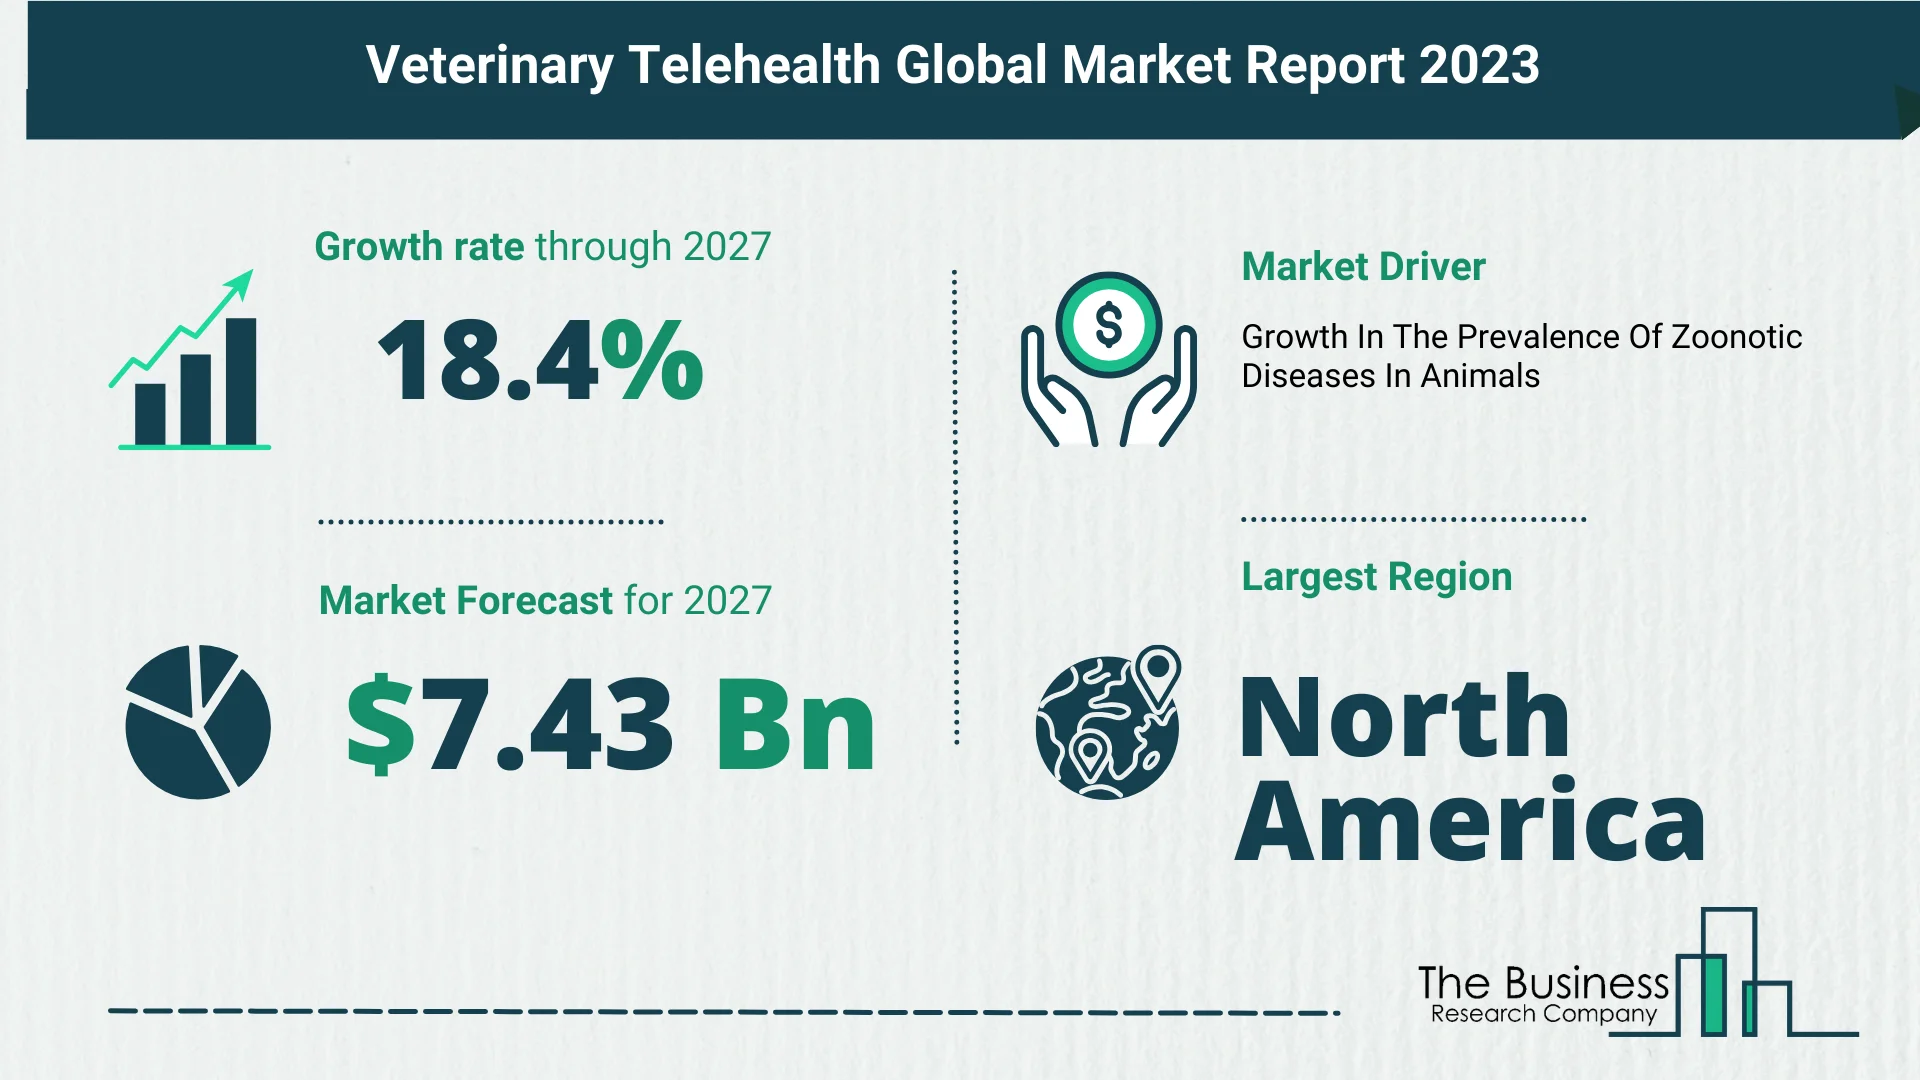 How Will The Veterinary Telehealth Market Size Grow In The Coming Years?